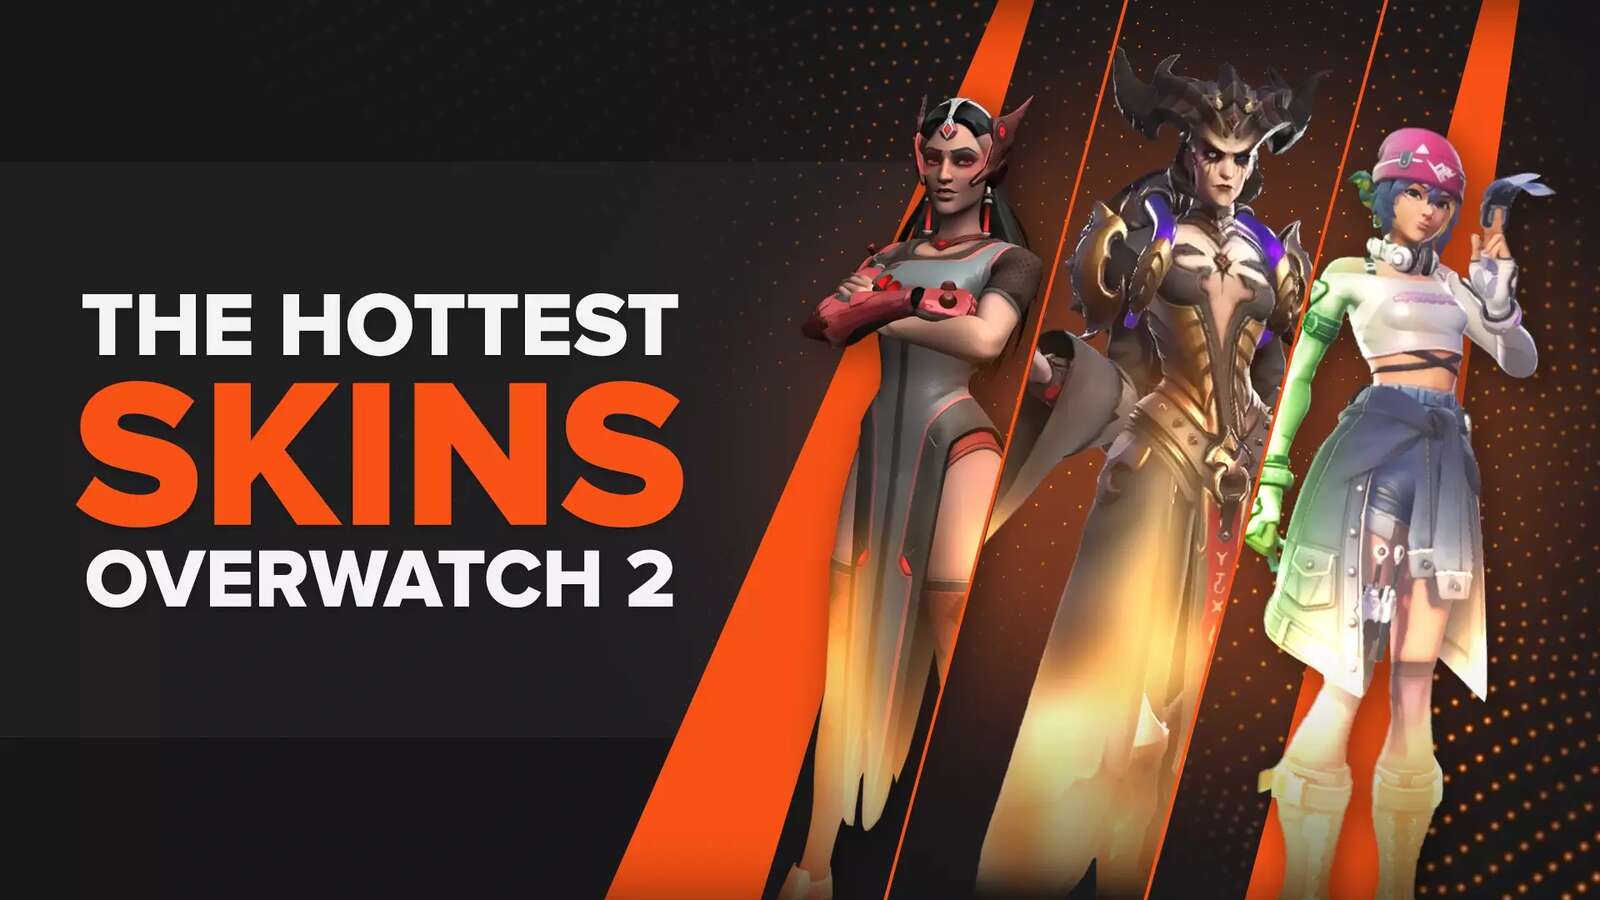 10 Hottest Skins in Overwatch 2 [Ranked]